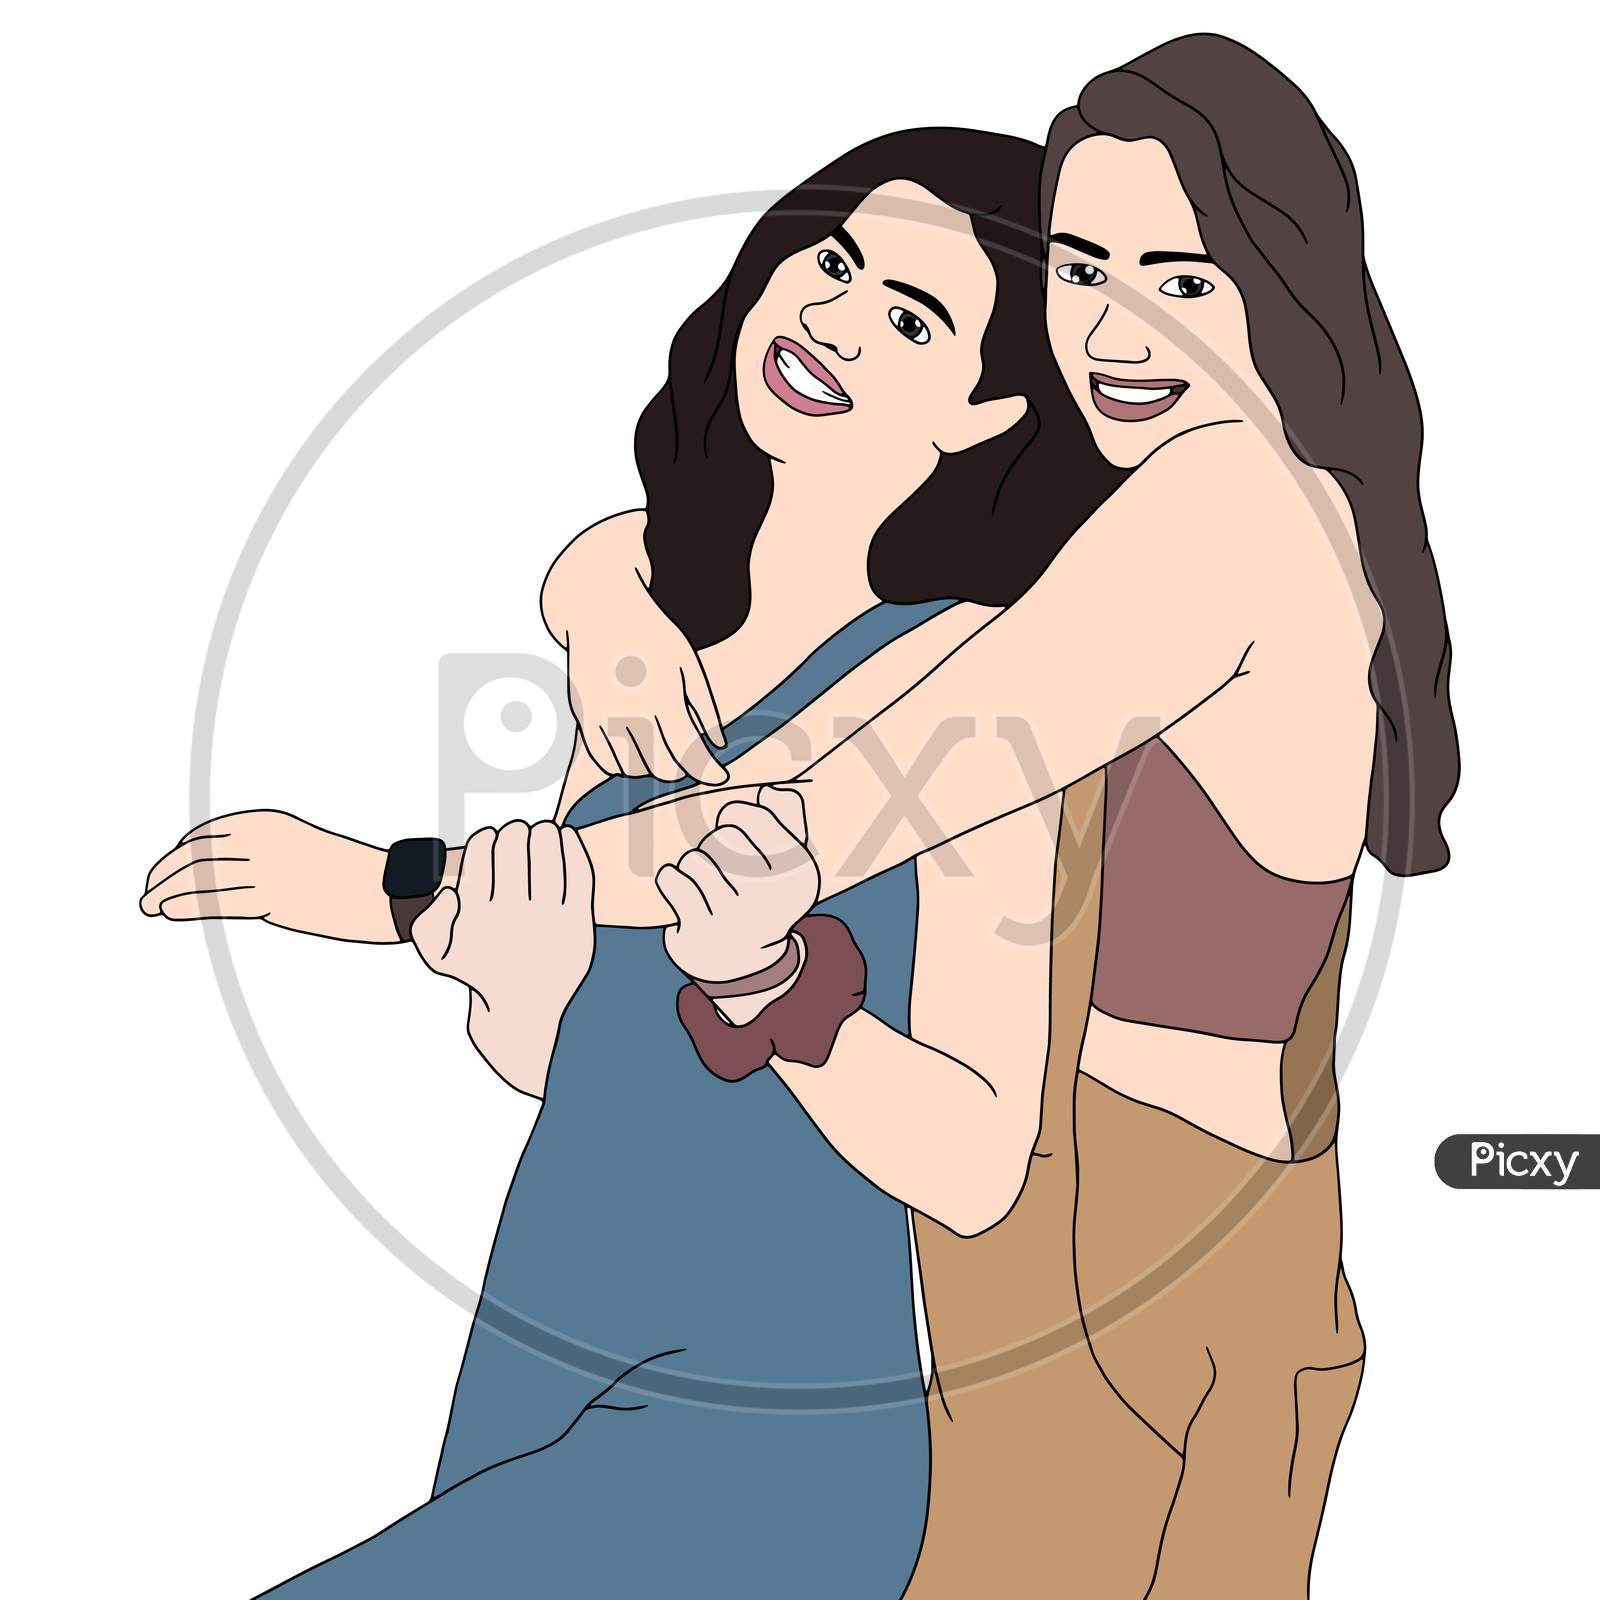 A Beautiful Relationship Of Two Girls, Best Friends Forever, Flat Colorful Illustration Of People For Friendship Day. Hand-Drawn Character Illustration Of Happy People.